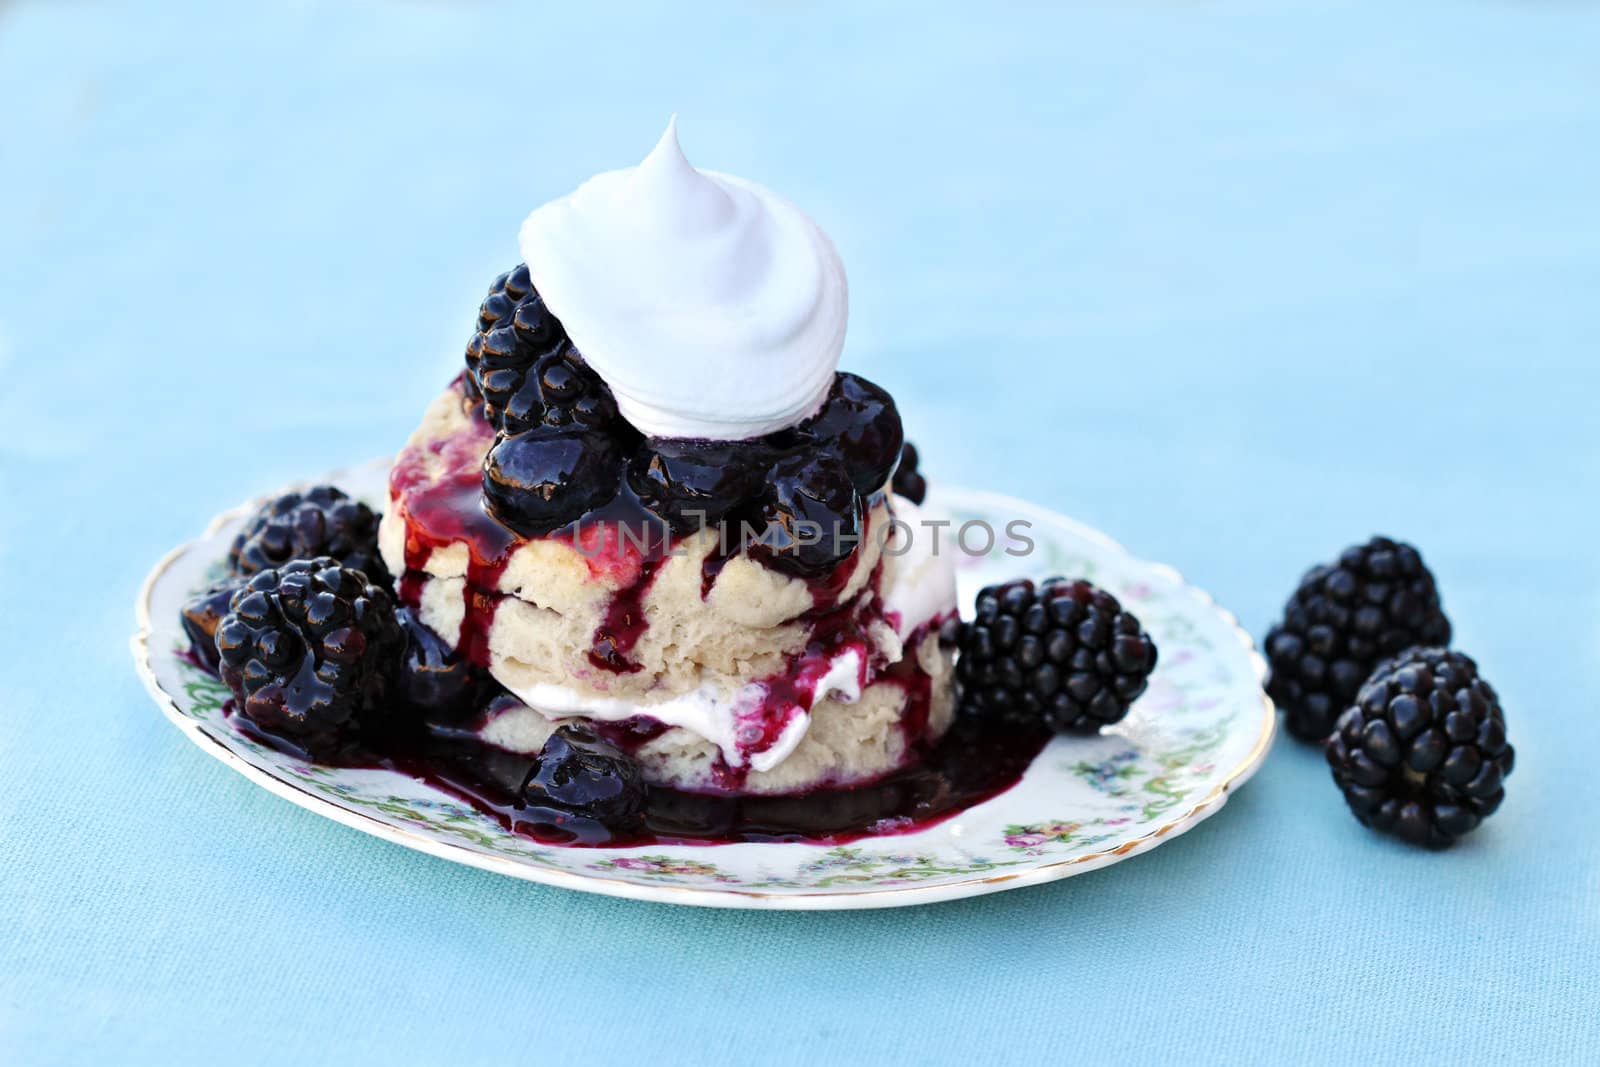 Delicious fresh made biscuits filled and topped with blackberry and blueberry filling, garnished with whipped cream.